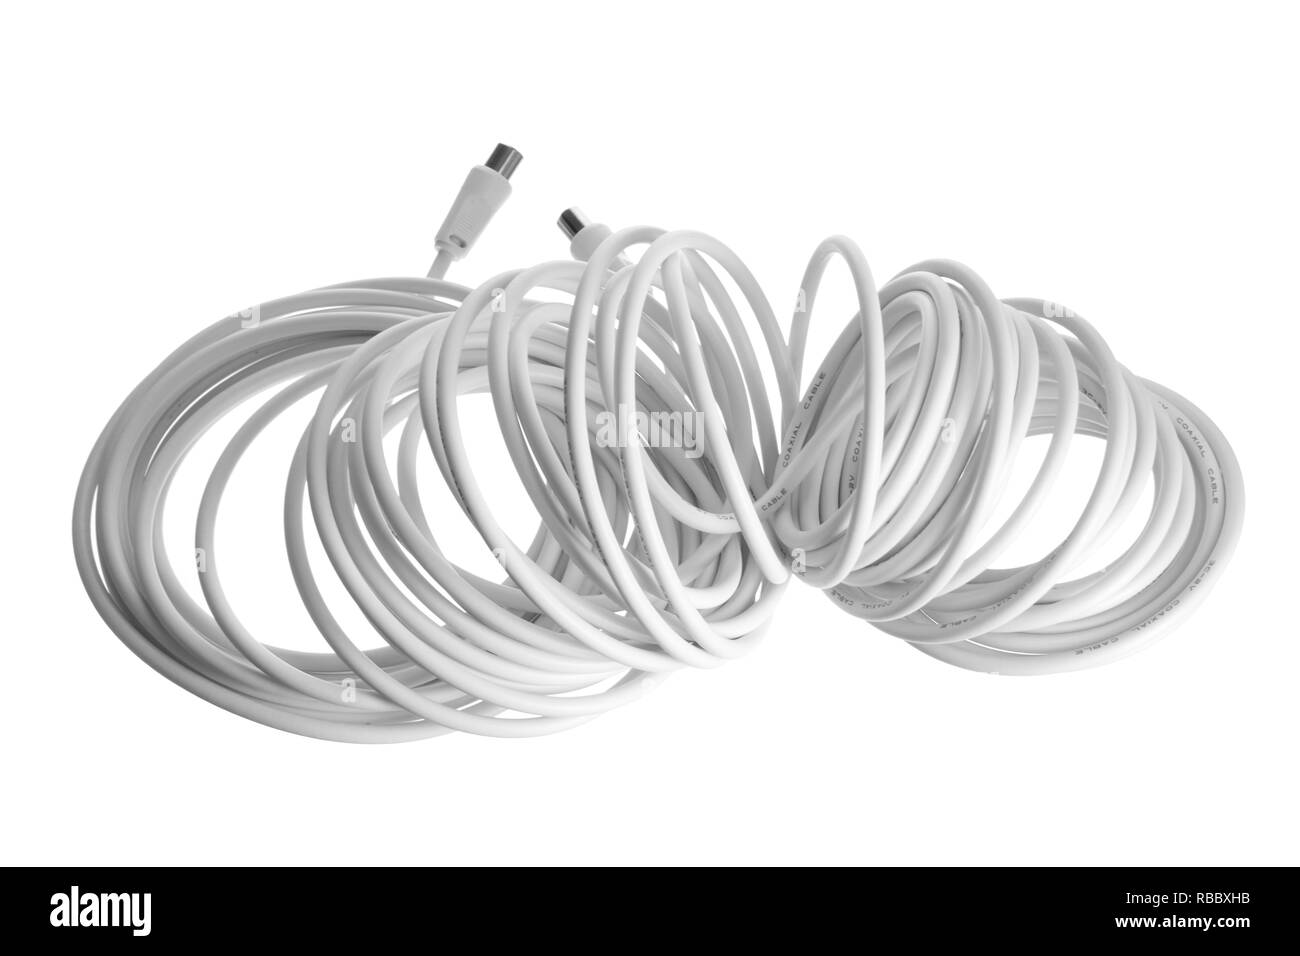 TV Aerial Extension Cable on White Background Stock Photo